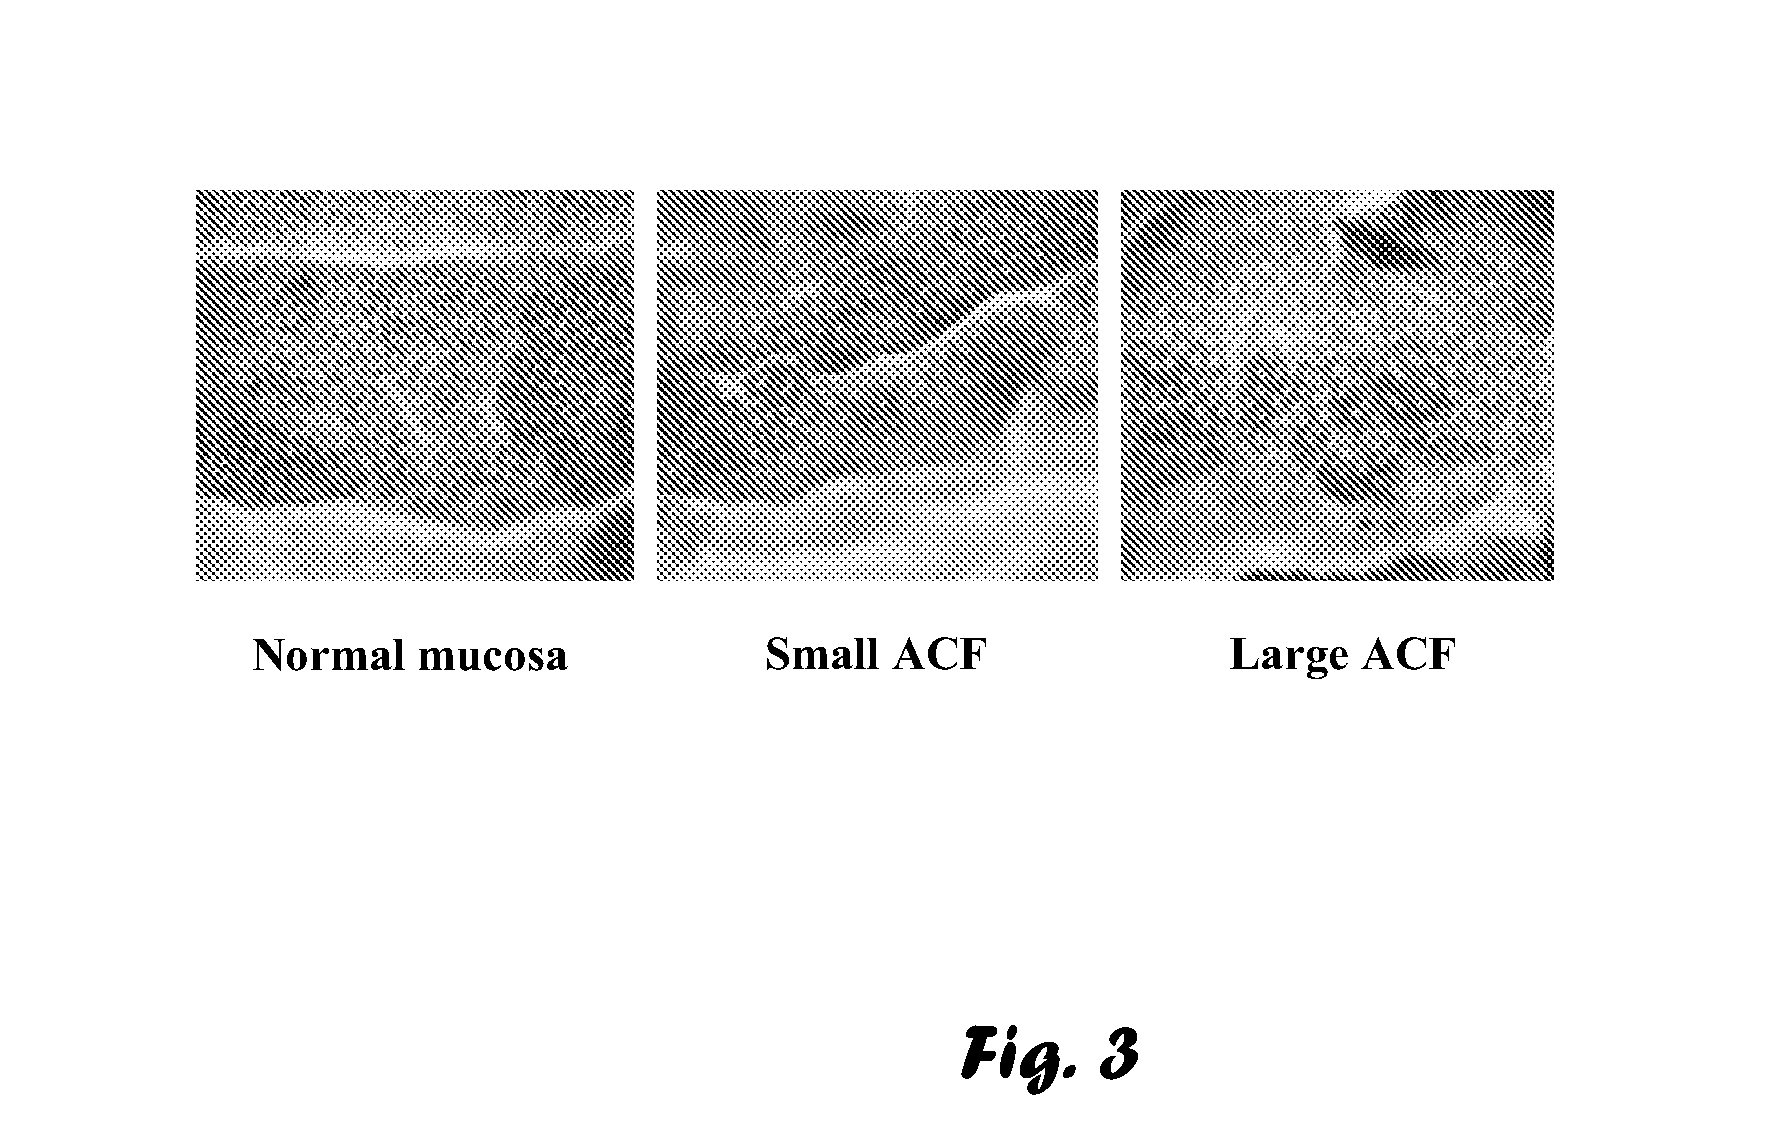 Tablet with remedial composition and methods for treating medical disorders and ailments